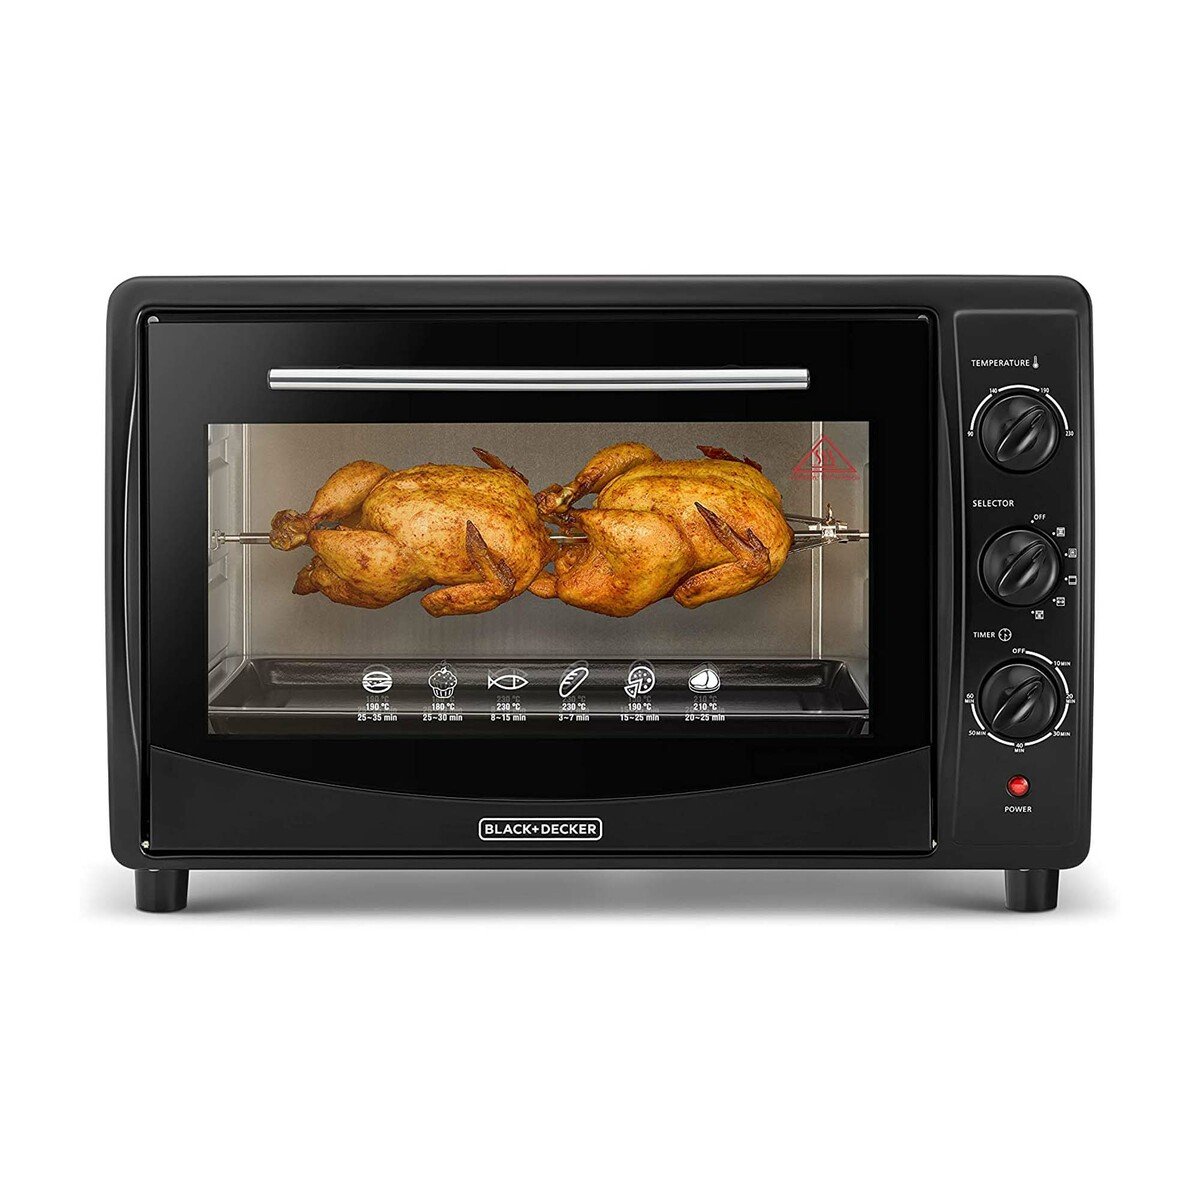 Black+Decker Double Glass Multifunction Toaster Oven with Rotisserie for Toasting/ Baking/ Broiling, TRO45RDGB5 45LTR